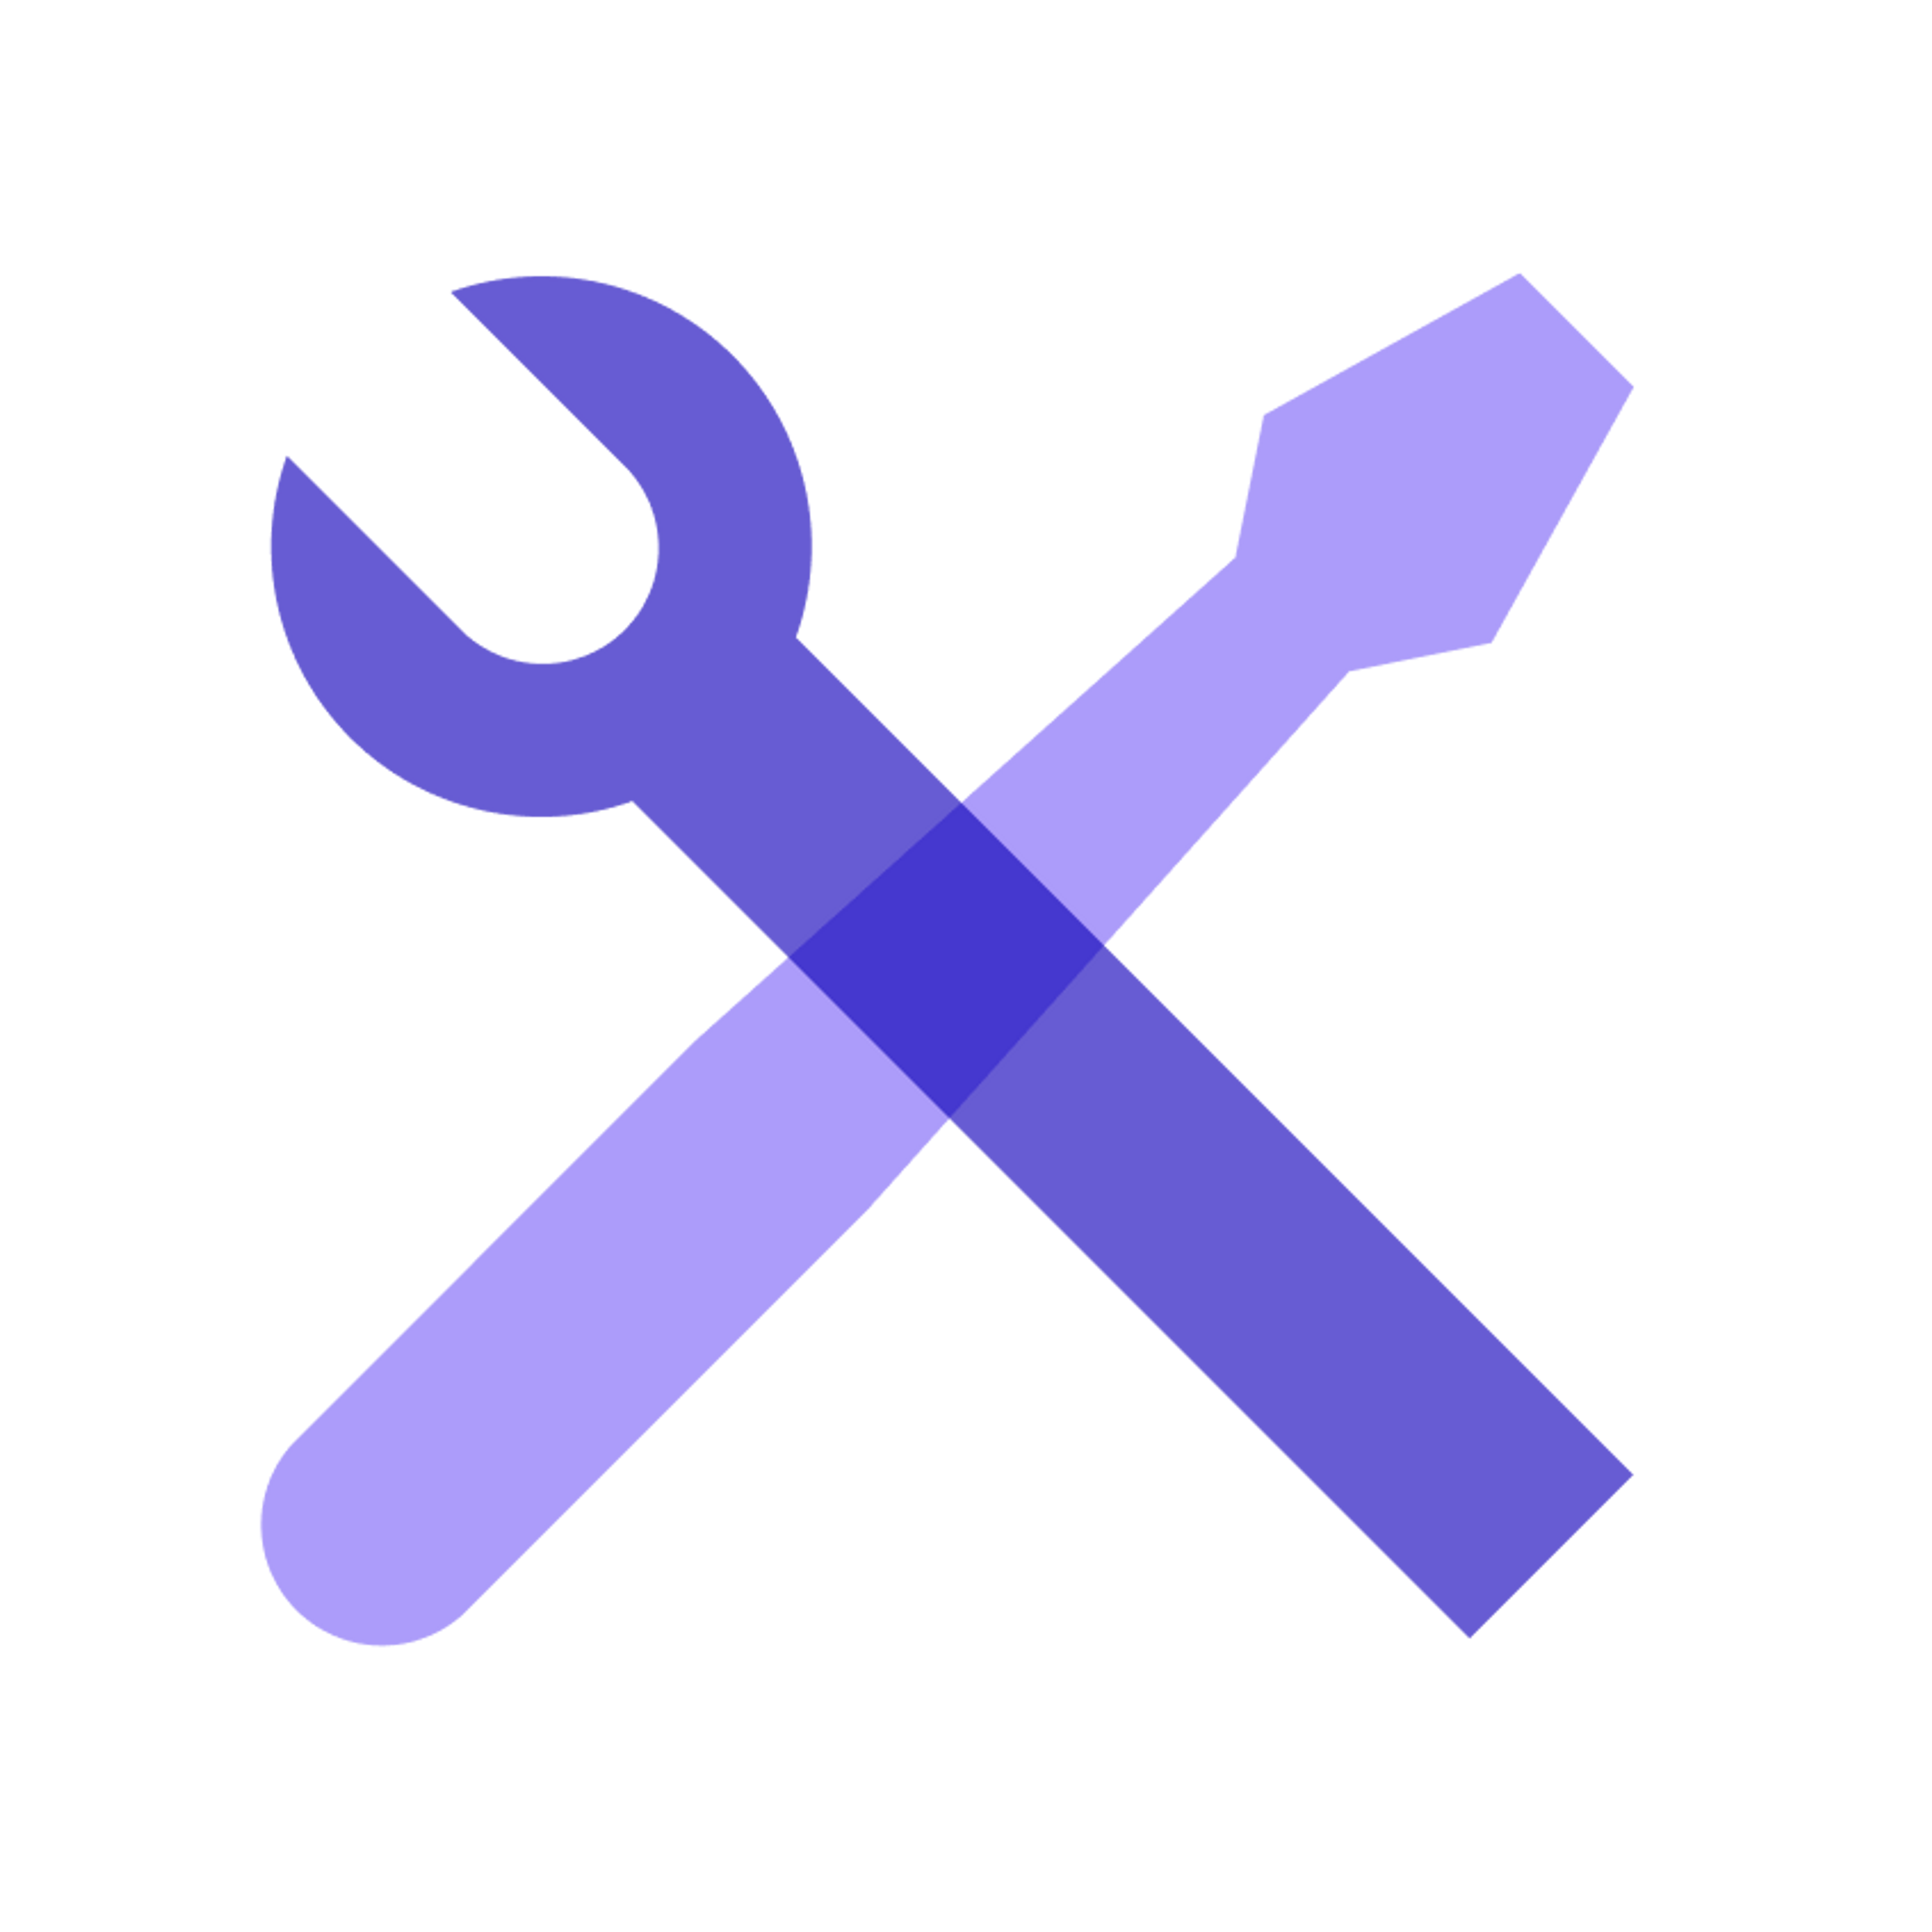 A purple icon of a wrench and screwdriver on a transparent background